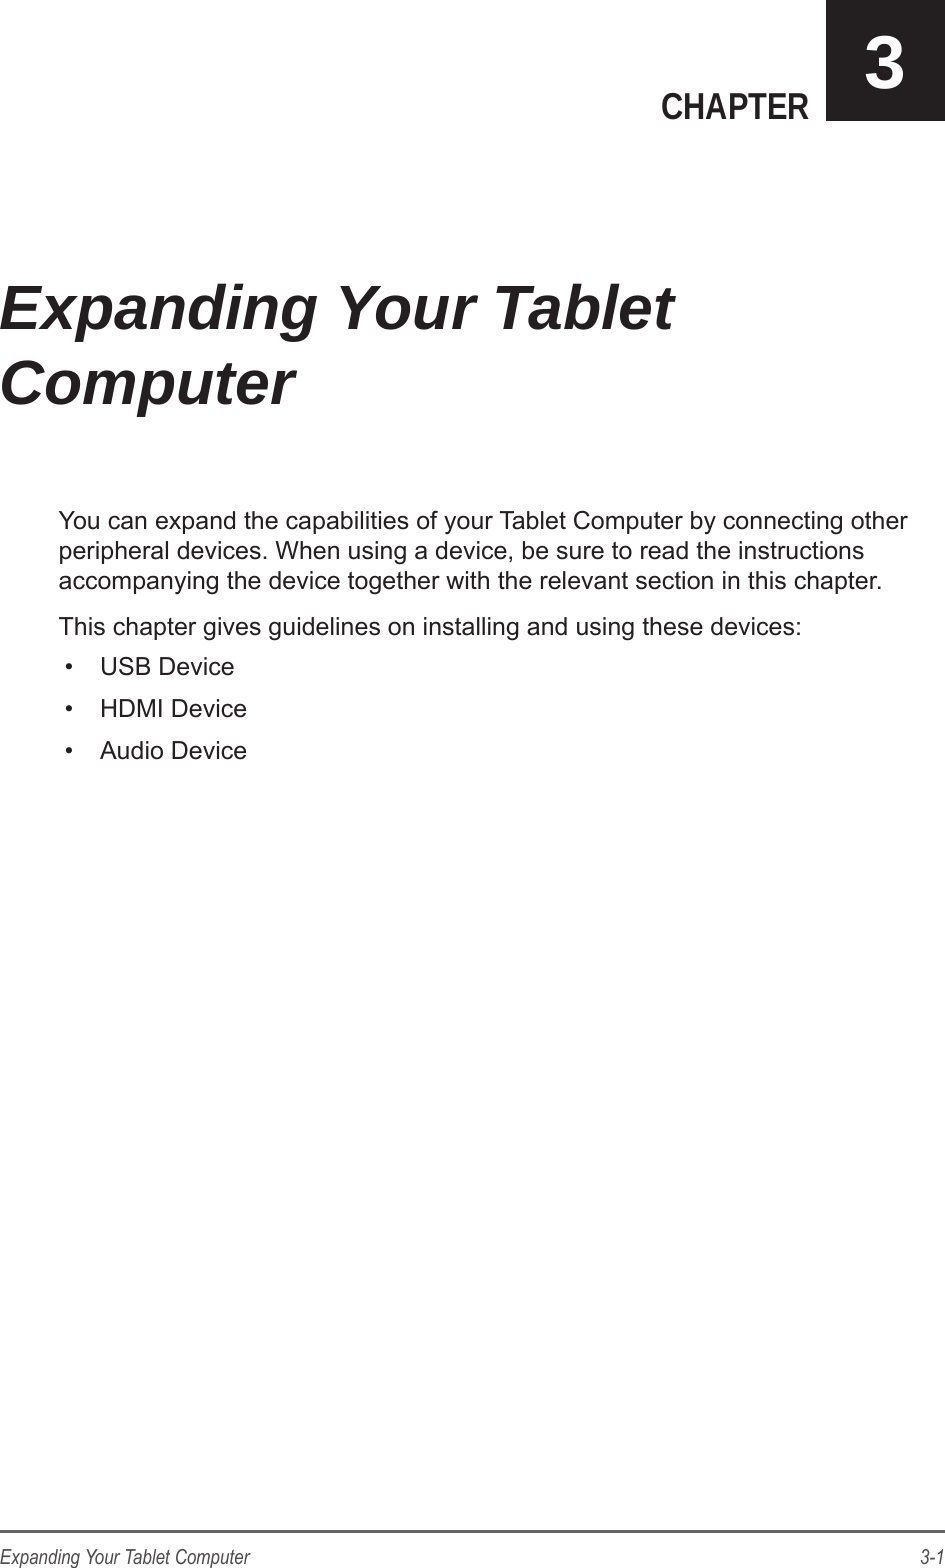 3-1Expanding Your Tablet ComputerCHAPTER 3You can expand the capabilities of your Tablet Computer by connecting other peripheral devices. When using a device, be sure to read the instructions accompanying the device together with the relevant section in this chapter.This chapter gives guidelines on installing and using these devices:•  USB Device•  HDMI Device•  Audio DeviceExpanding Your Tablet Computer